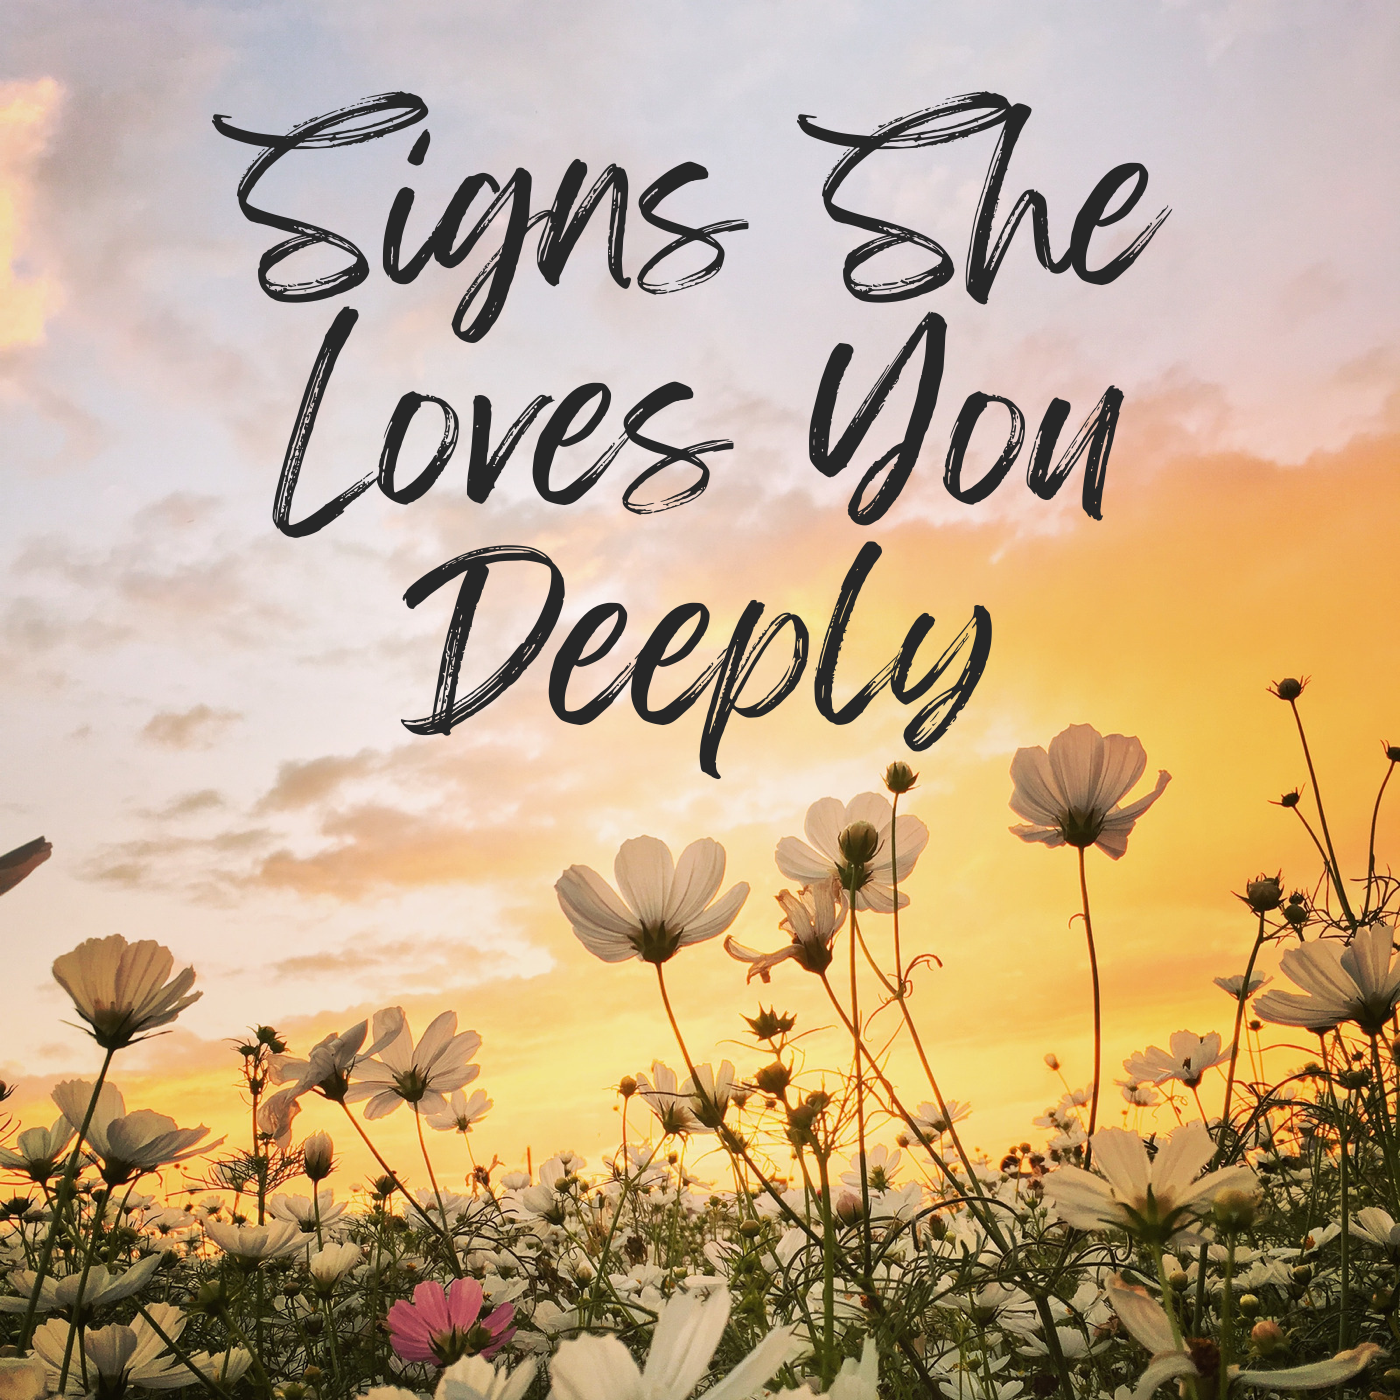 21 Signs She Loves You Deeply